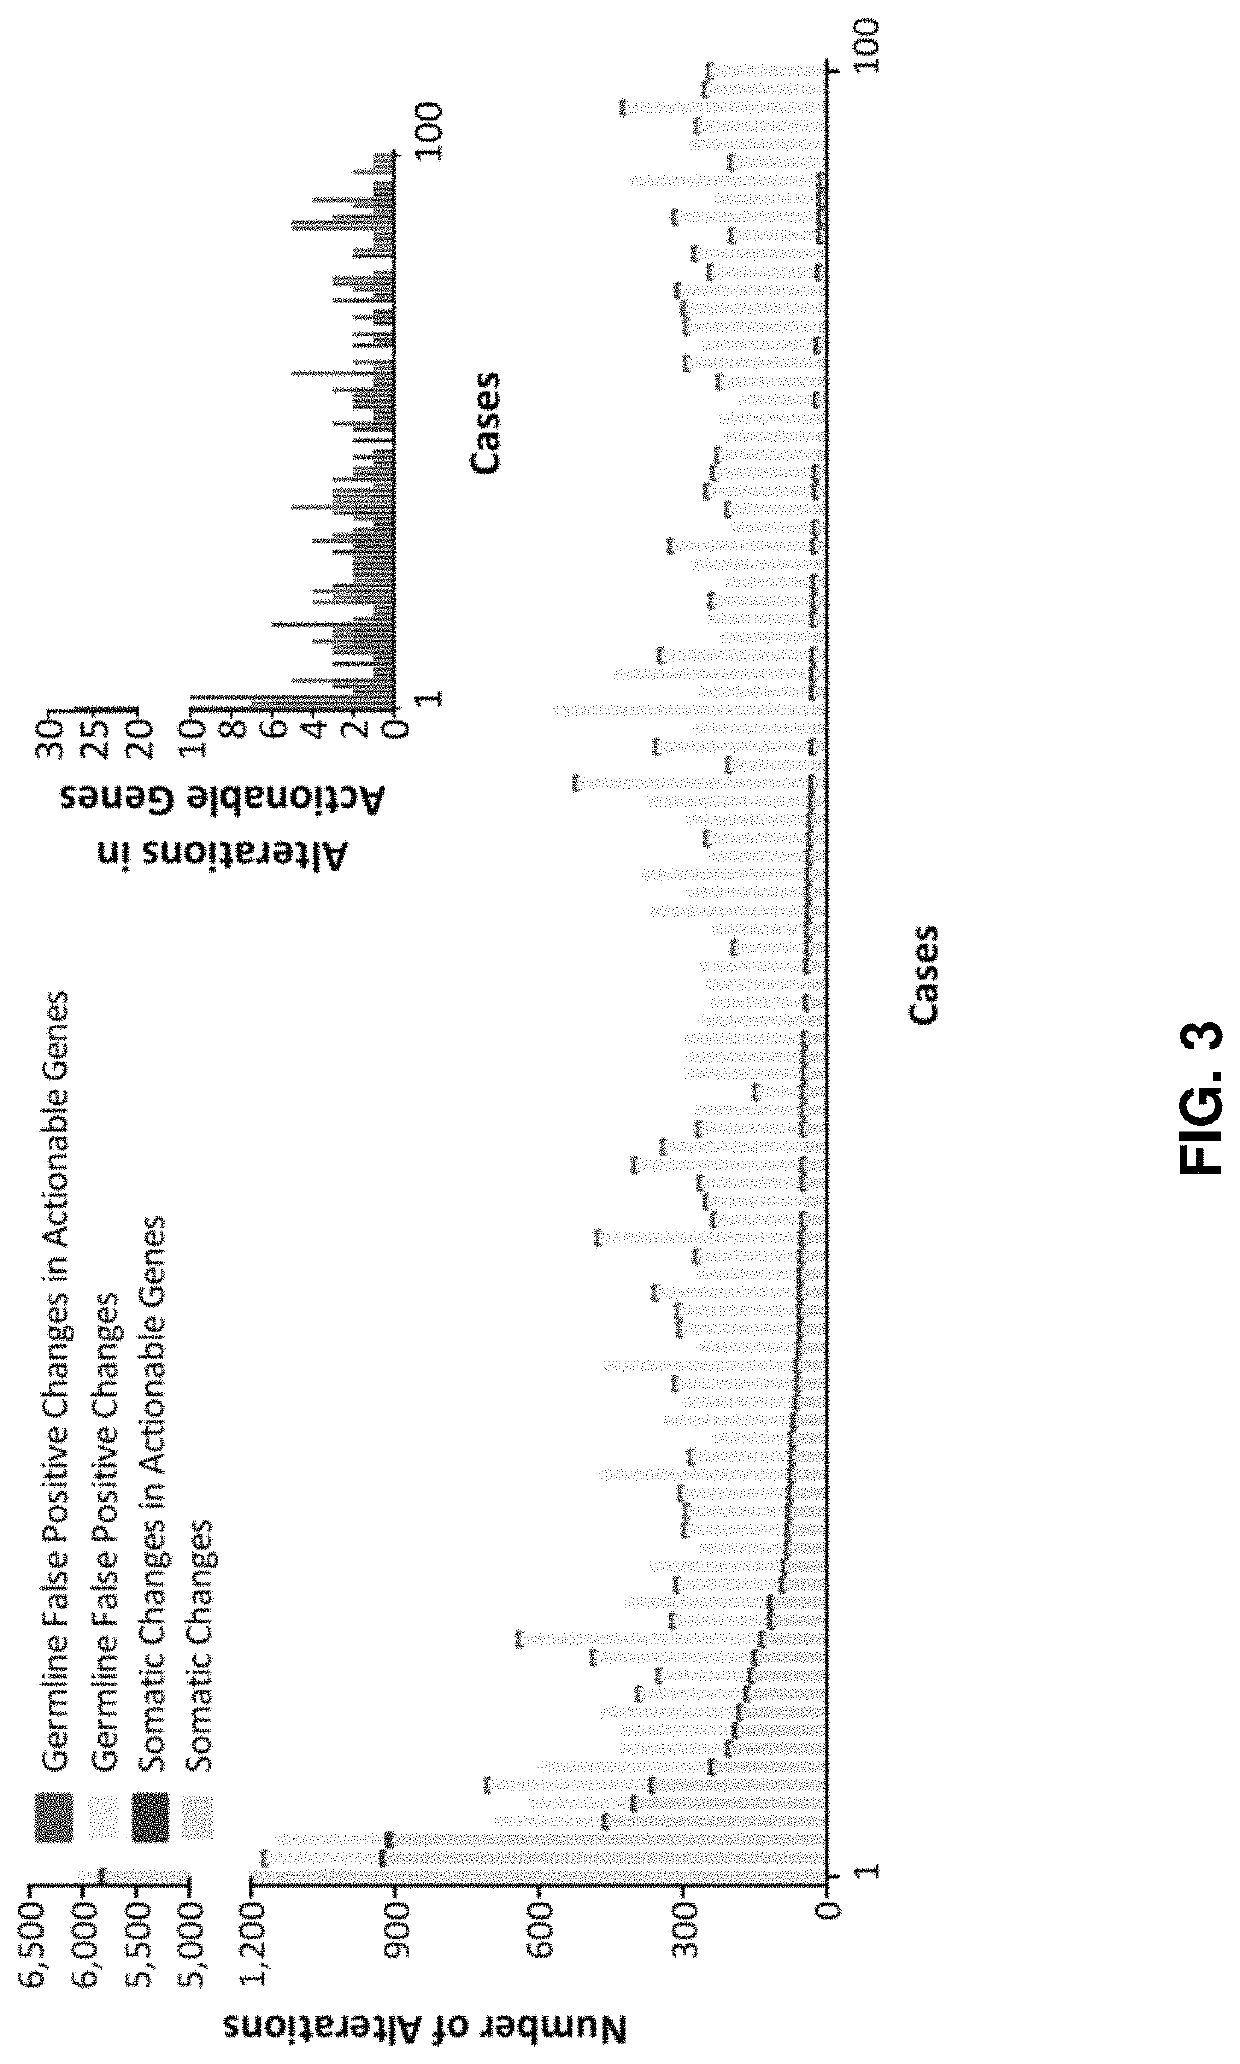 Neoantigen treatment prioritization using multivariate analysis based on: HLA genotype, self-similarity, similarity to known antigens, antigen expression levels and mutant allele frequency